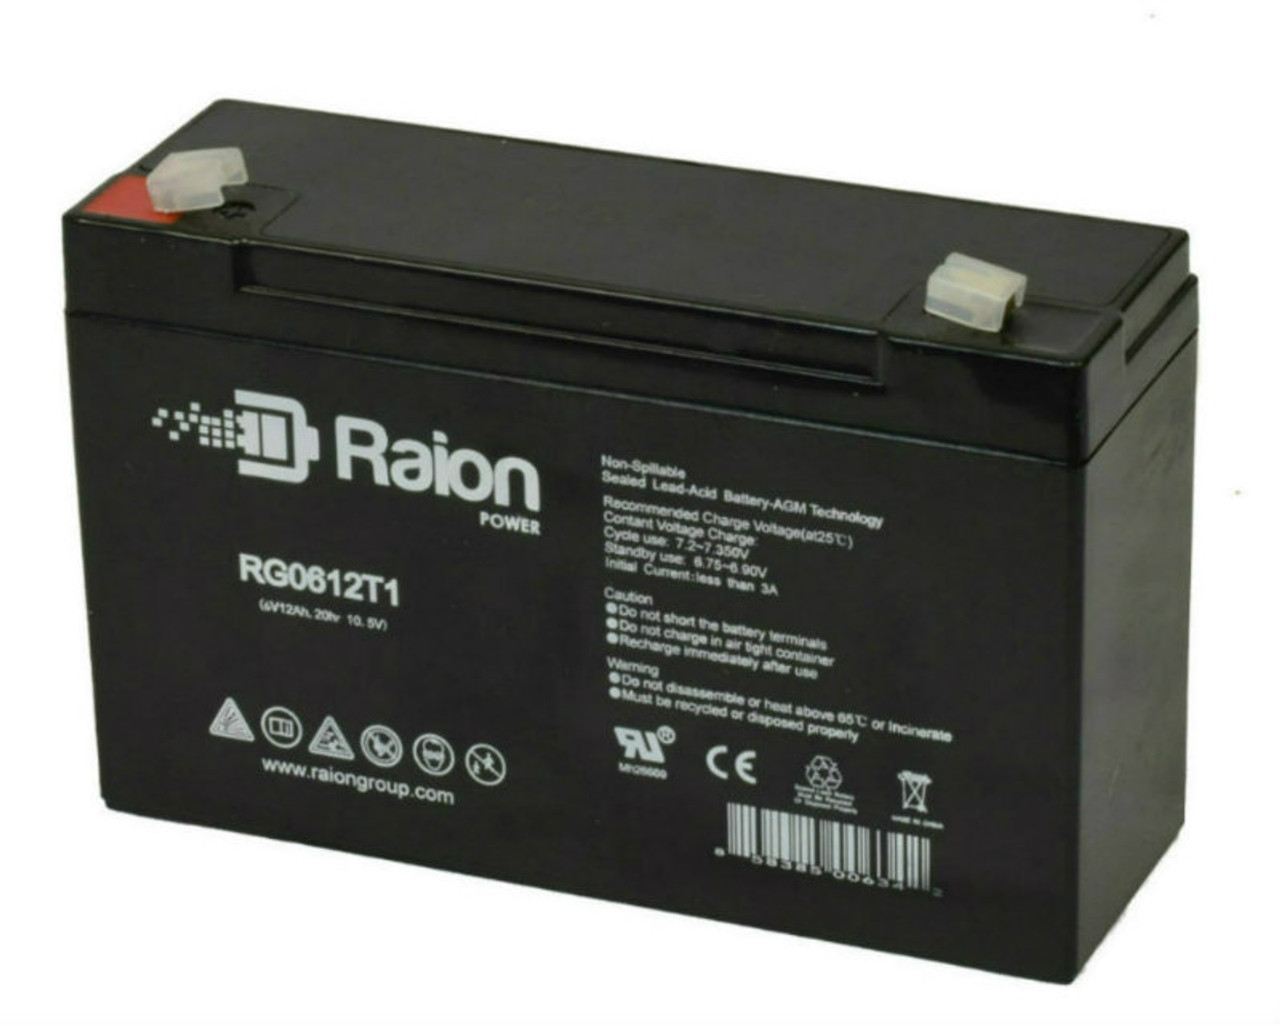 Raion Power RG06120T1 Replacement Battery for Peg Perego KP11159